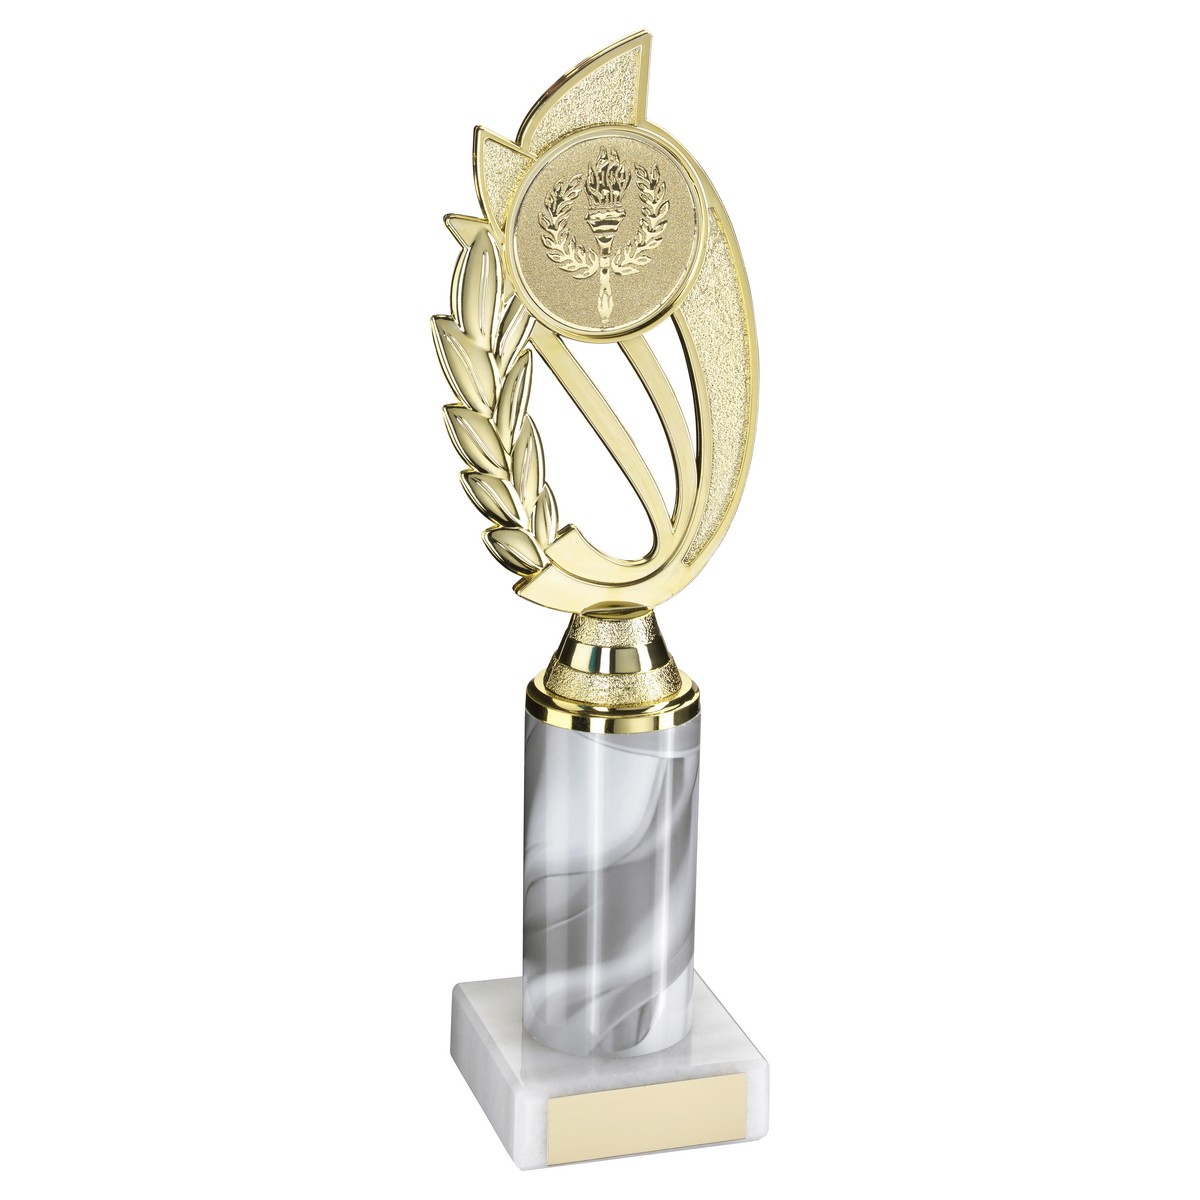 Halcyon Trophy - JR34-TY173 White Marble Finish